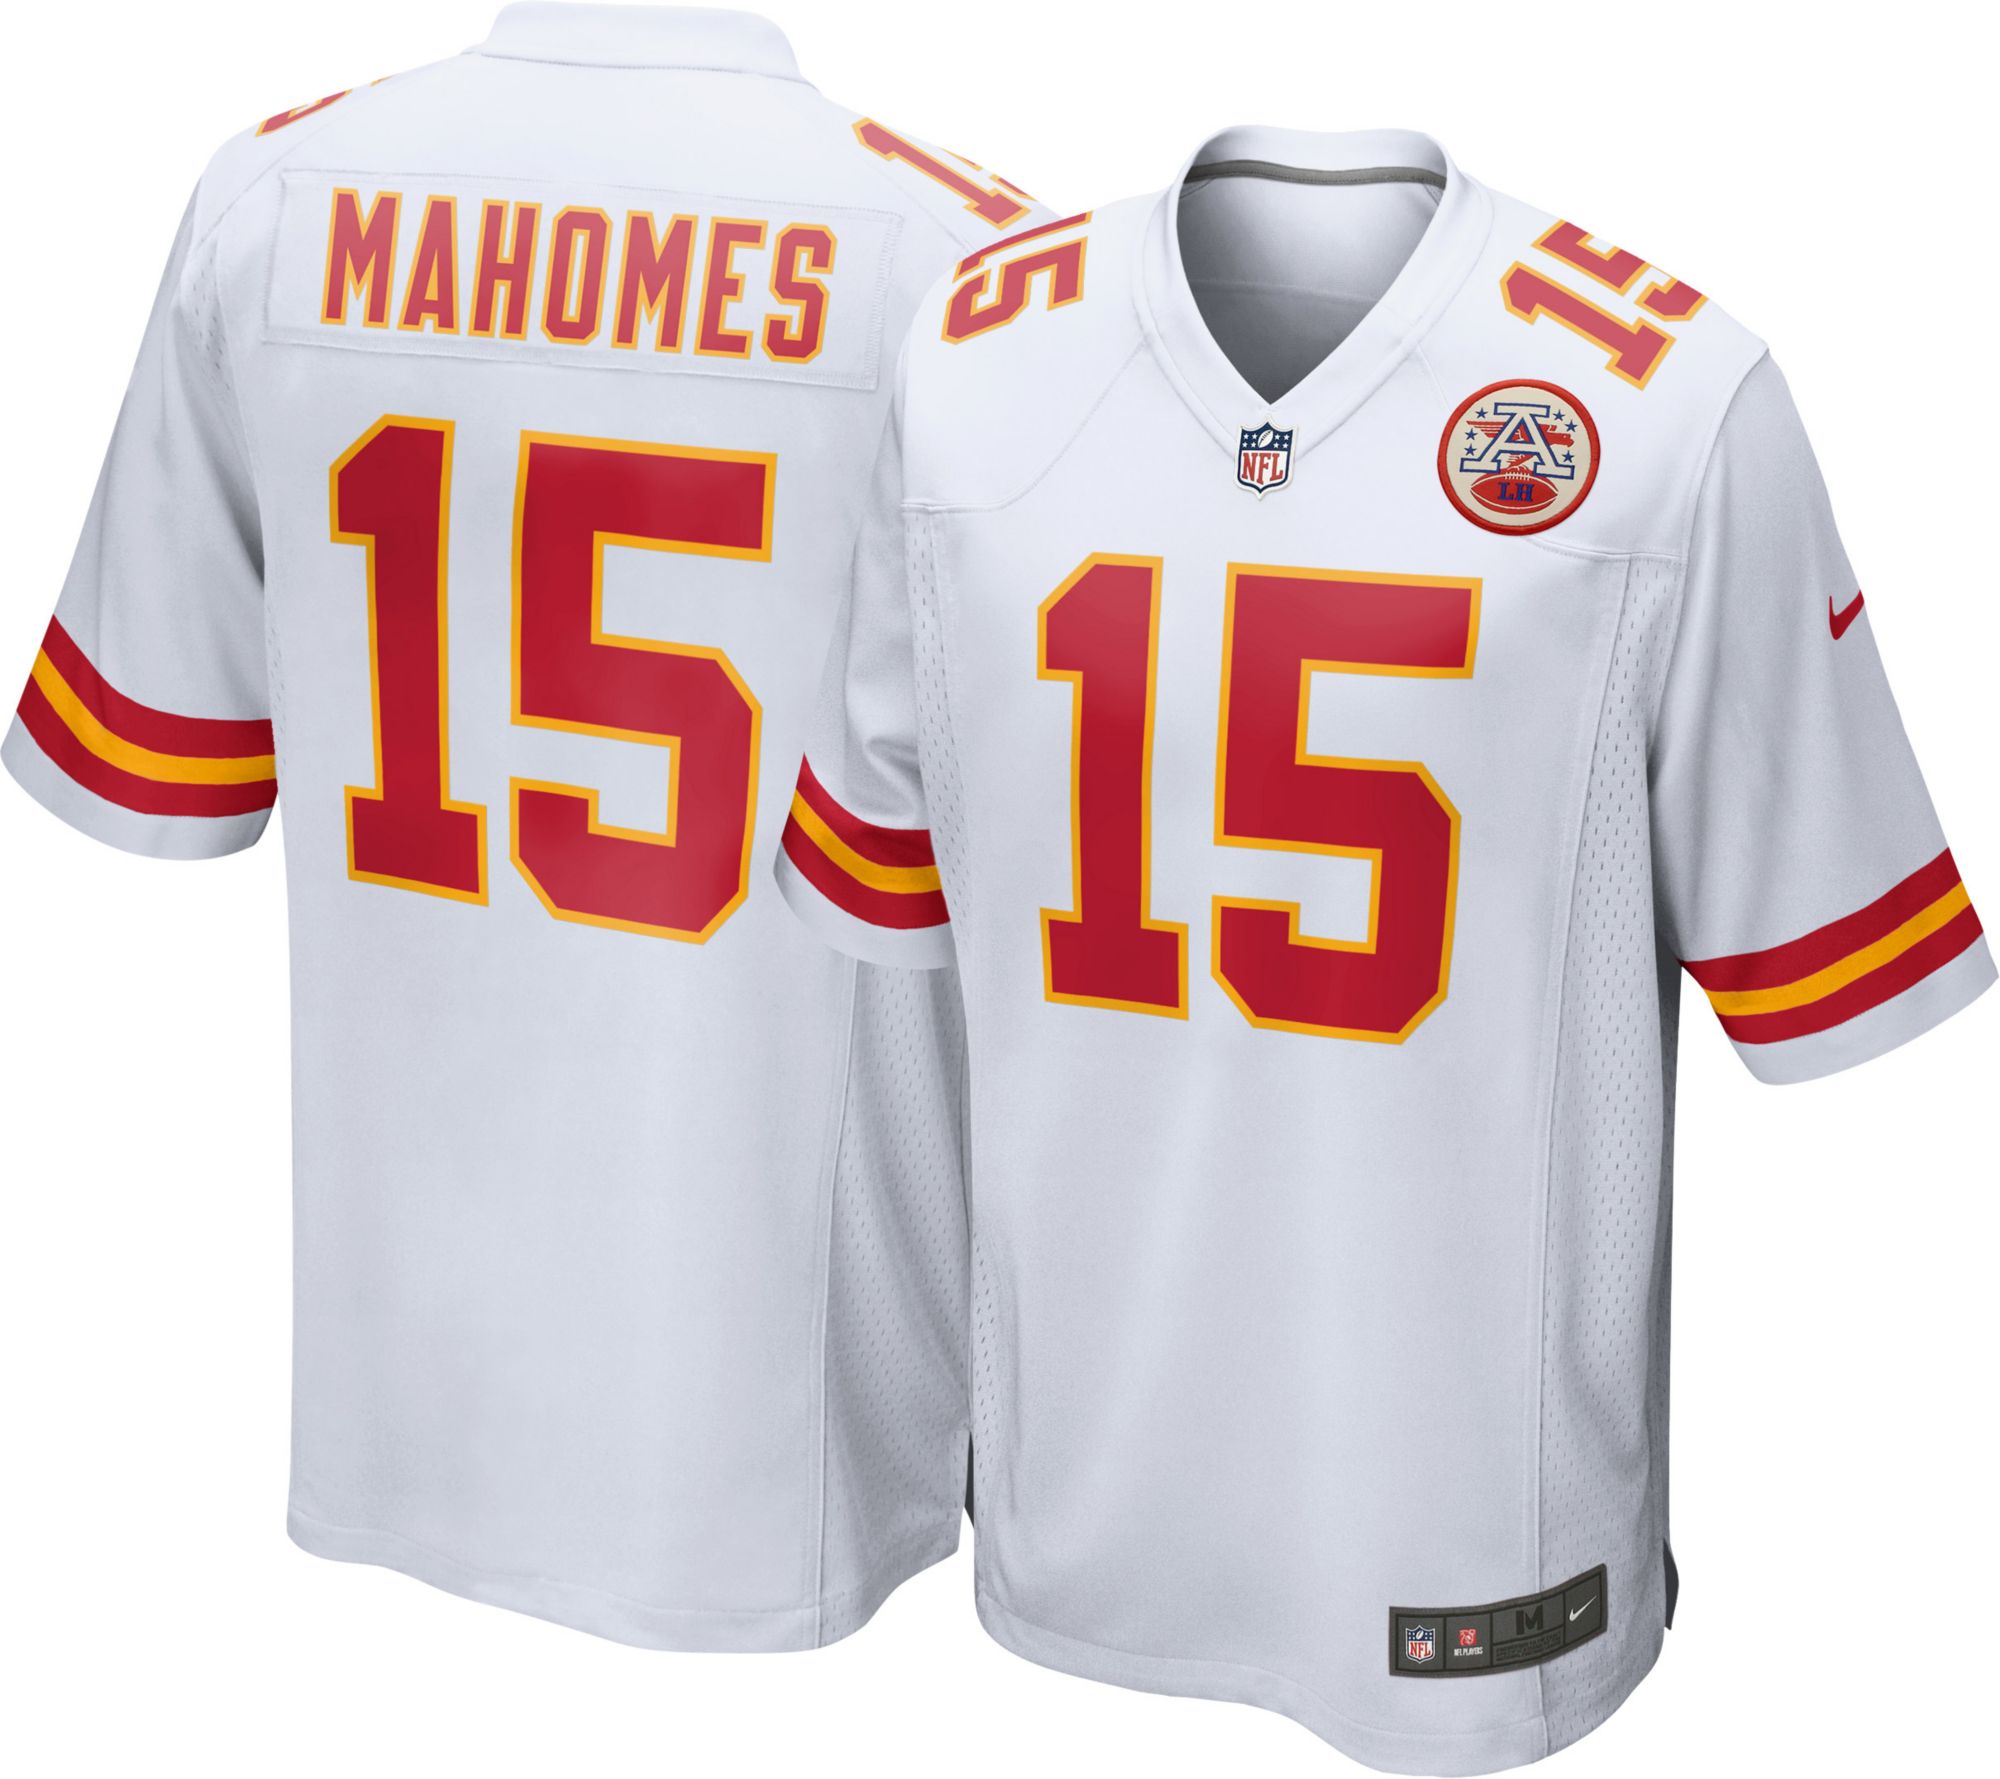 kc chief jersey